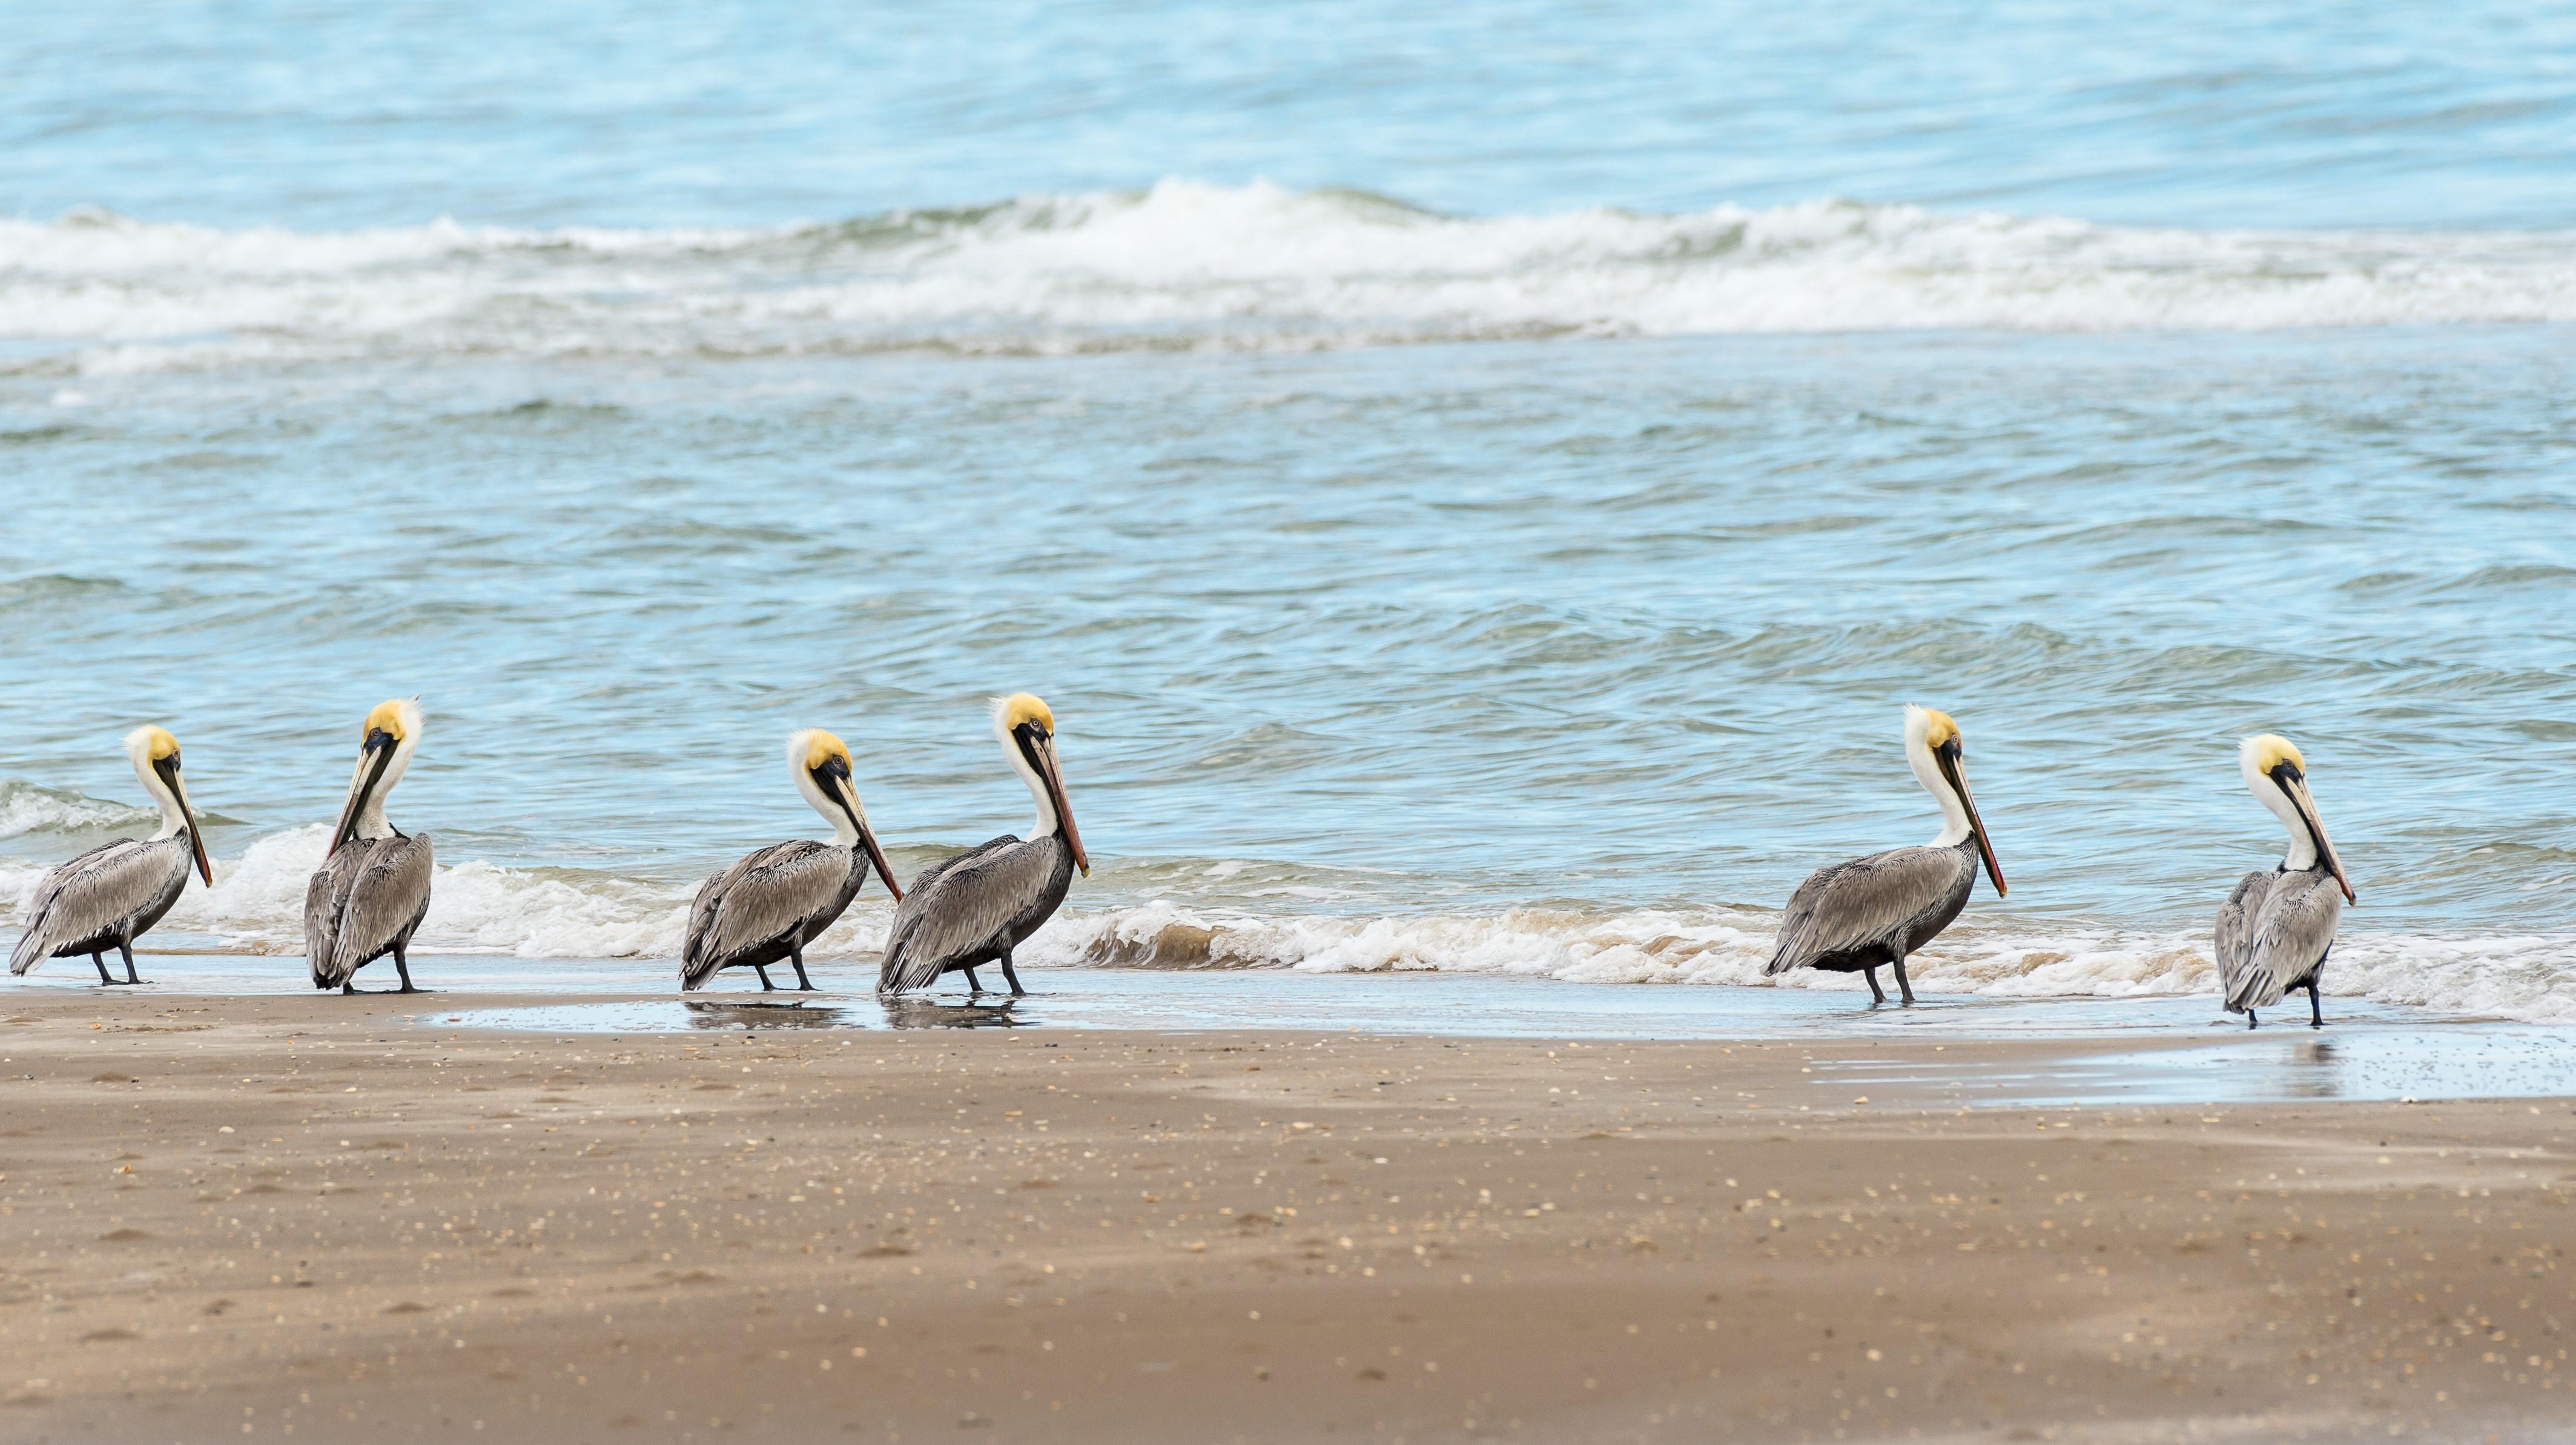 Several brown pelicans stand on the sand next to the edge of the sea.